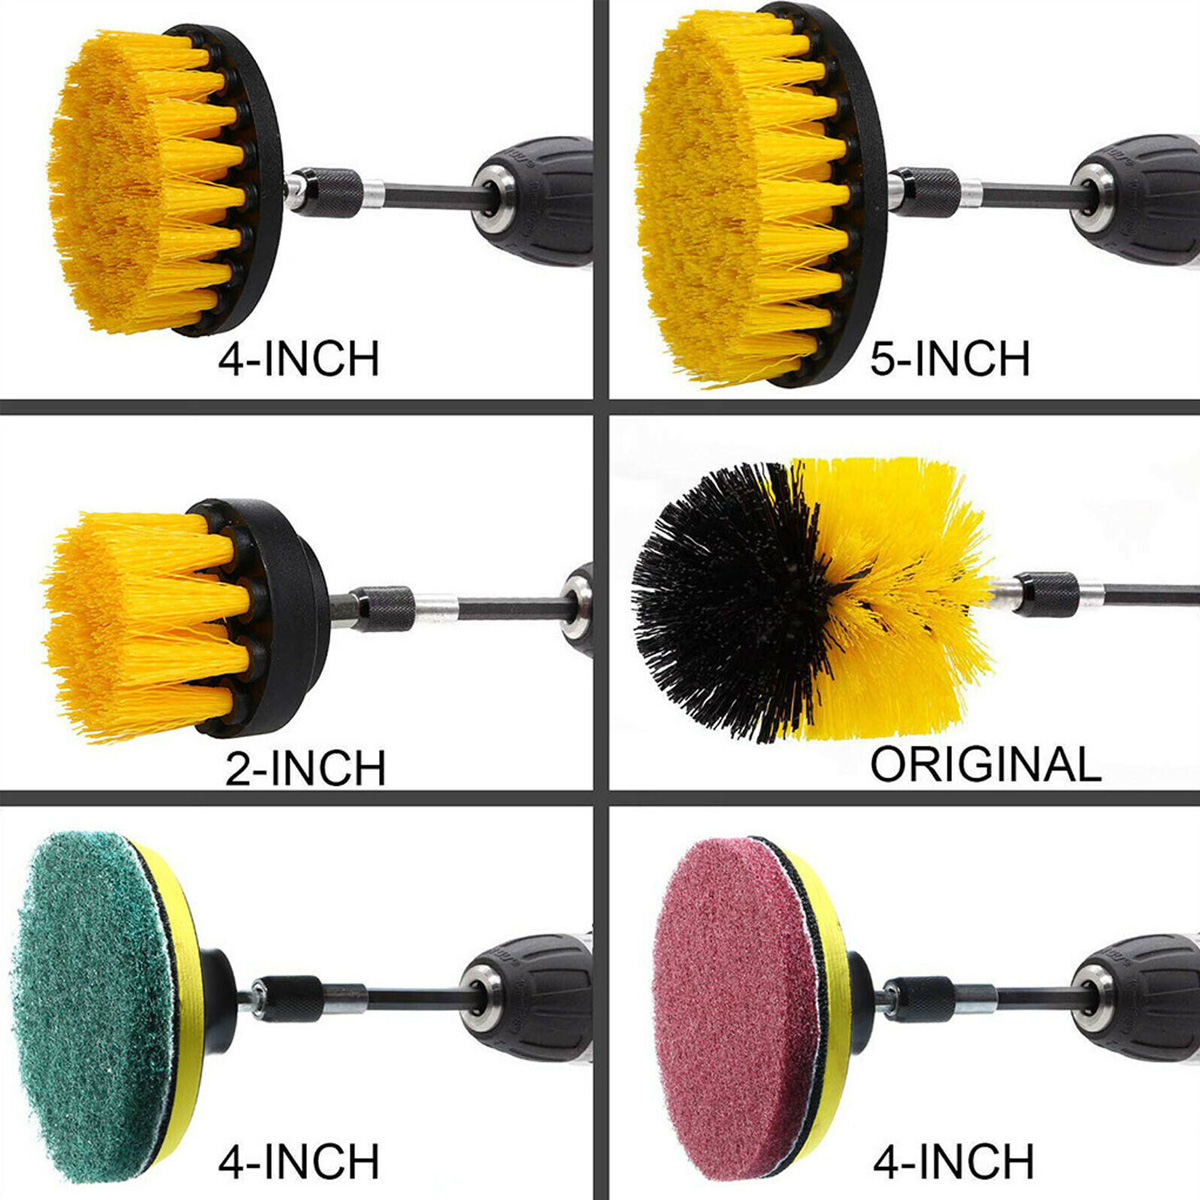 23pcs-Cleaning-Drill-Brush-Cleaner-Combo-Tool-Kit-Electric-Drill-Power-Scrubber-1746489-4